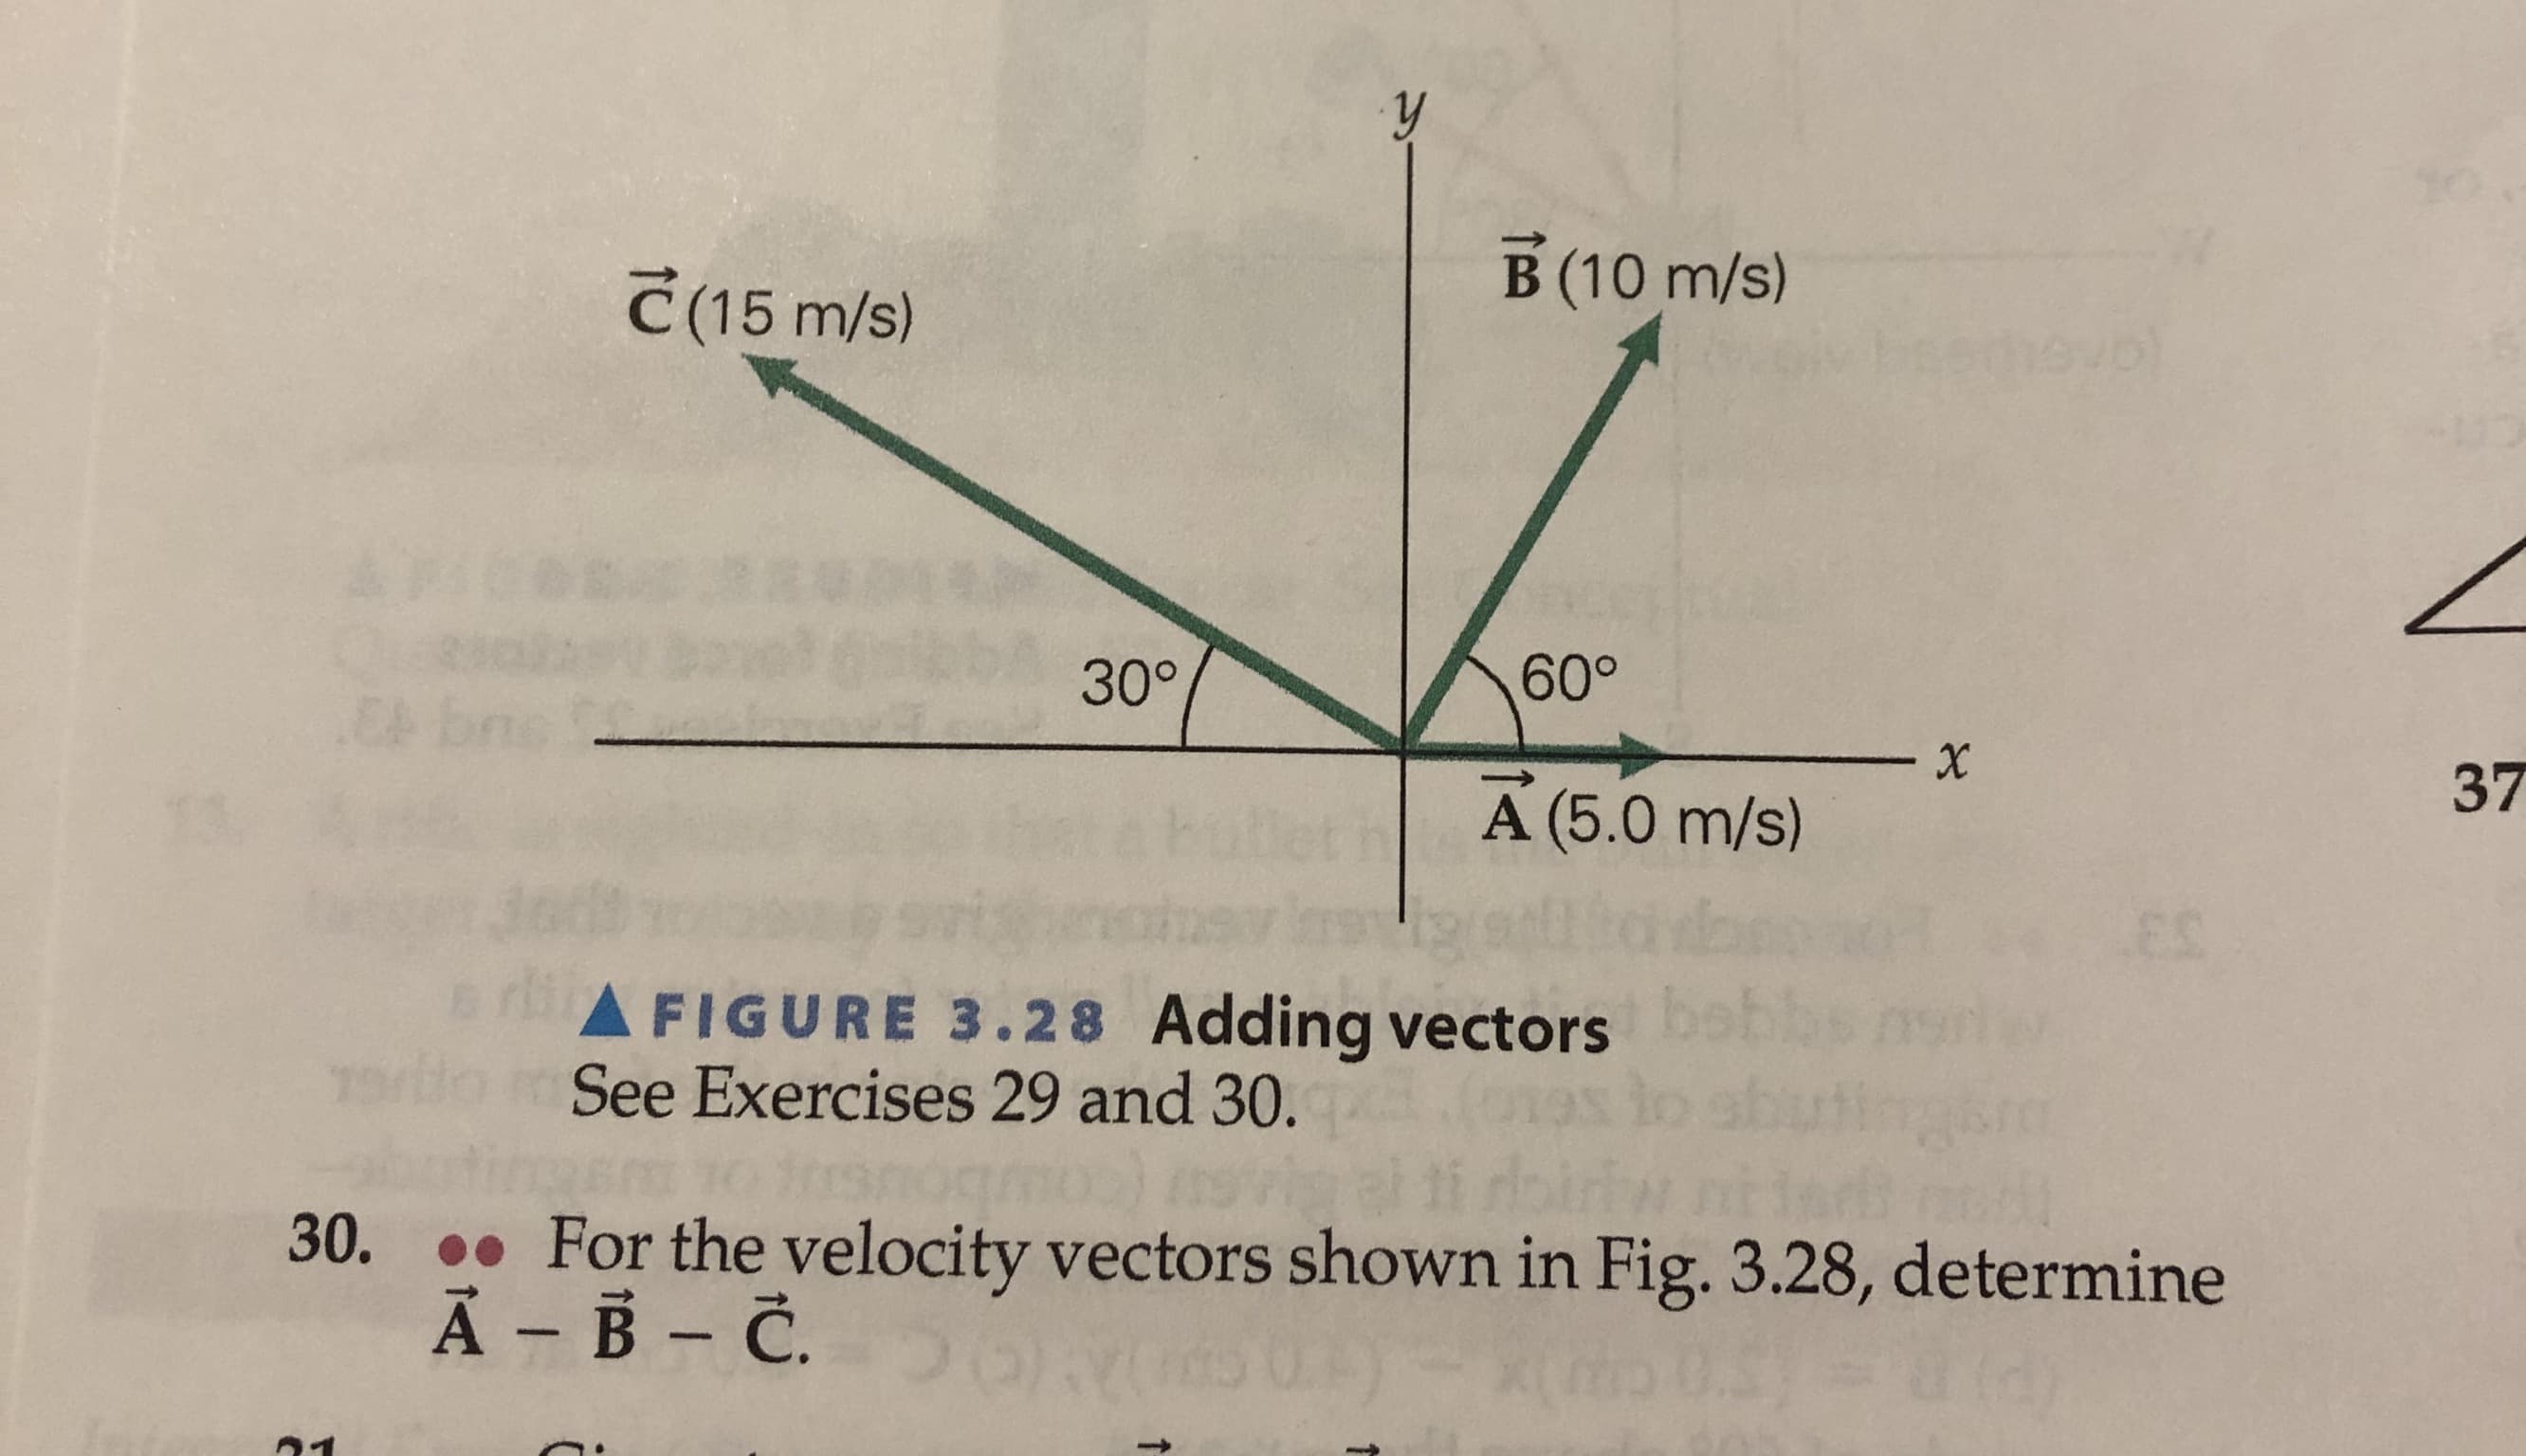 y
B (10 m/s)
C(15 m/s)
hevol
30°
60°
.CA bnc
X
37
A (5.0 m/s)
FIGURE 3.28 Adding vectors
See Exercises 29 and 30.
19
For the velocity vectors shown in Fig. 3.28, determine
A B C.
30.
